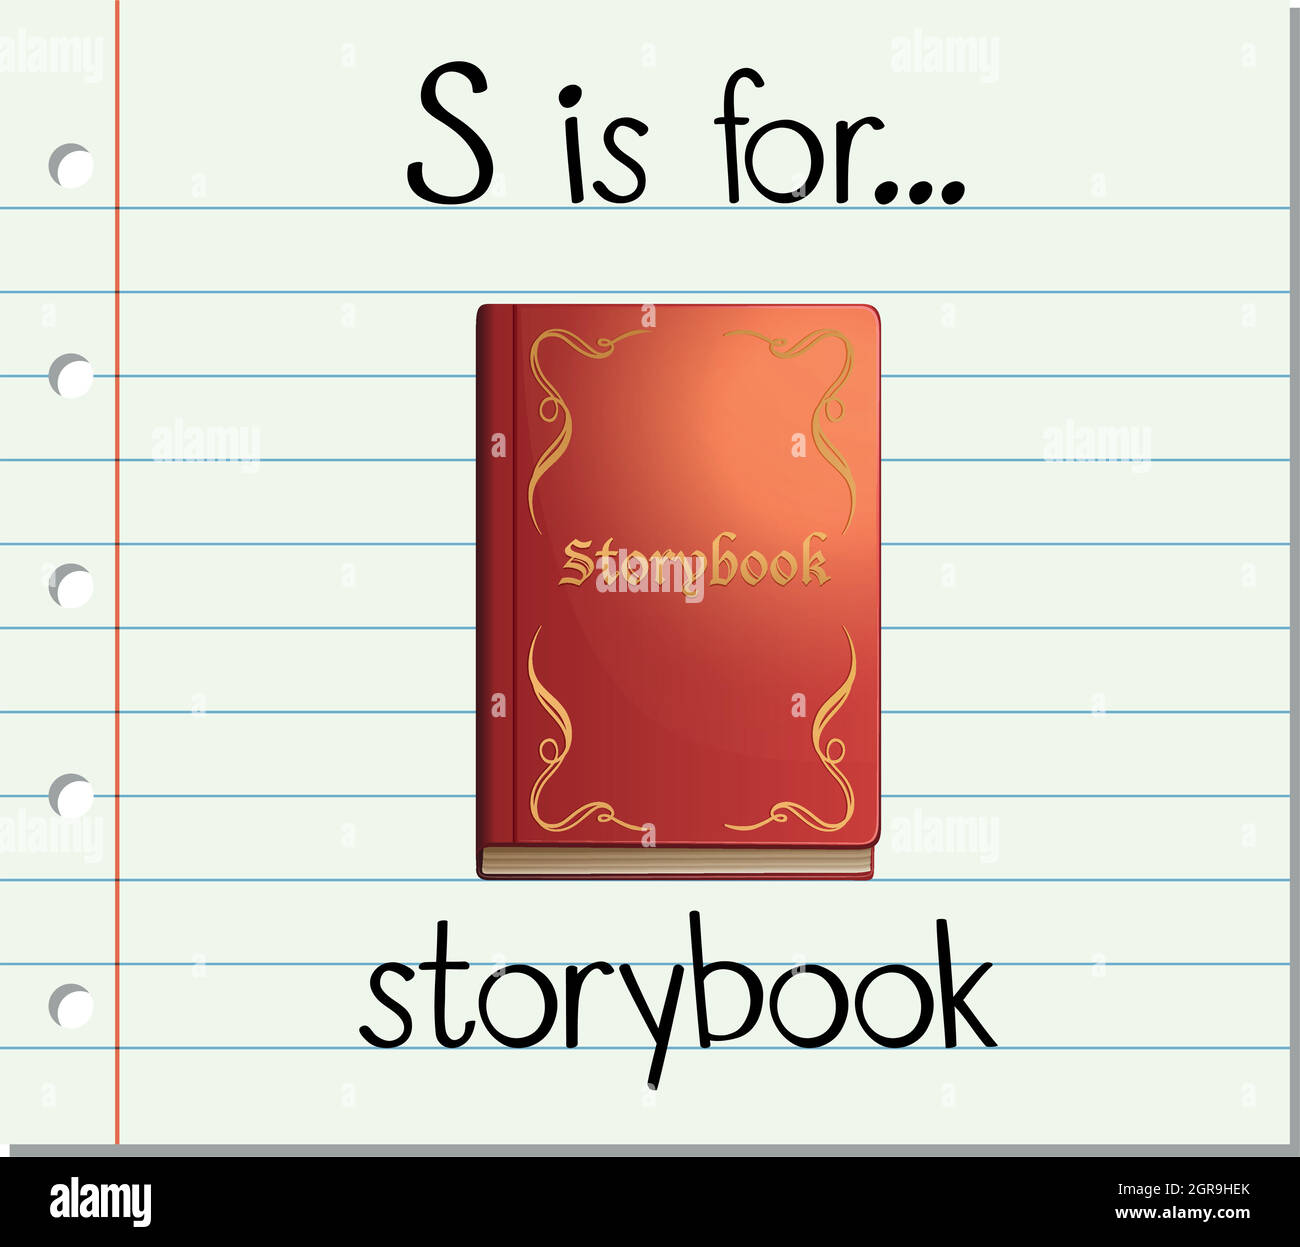 Flashcard letter S is for storybook Stock Vector